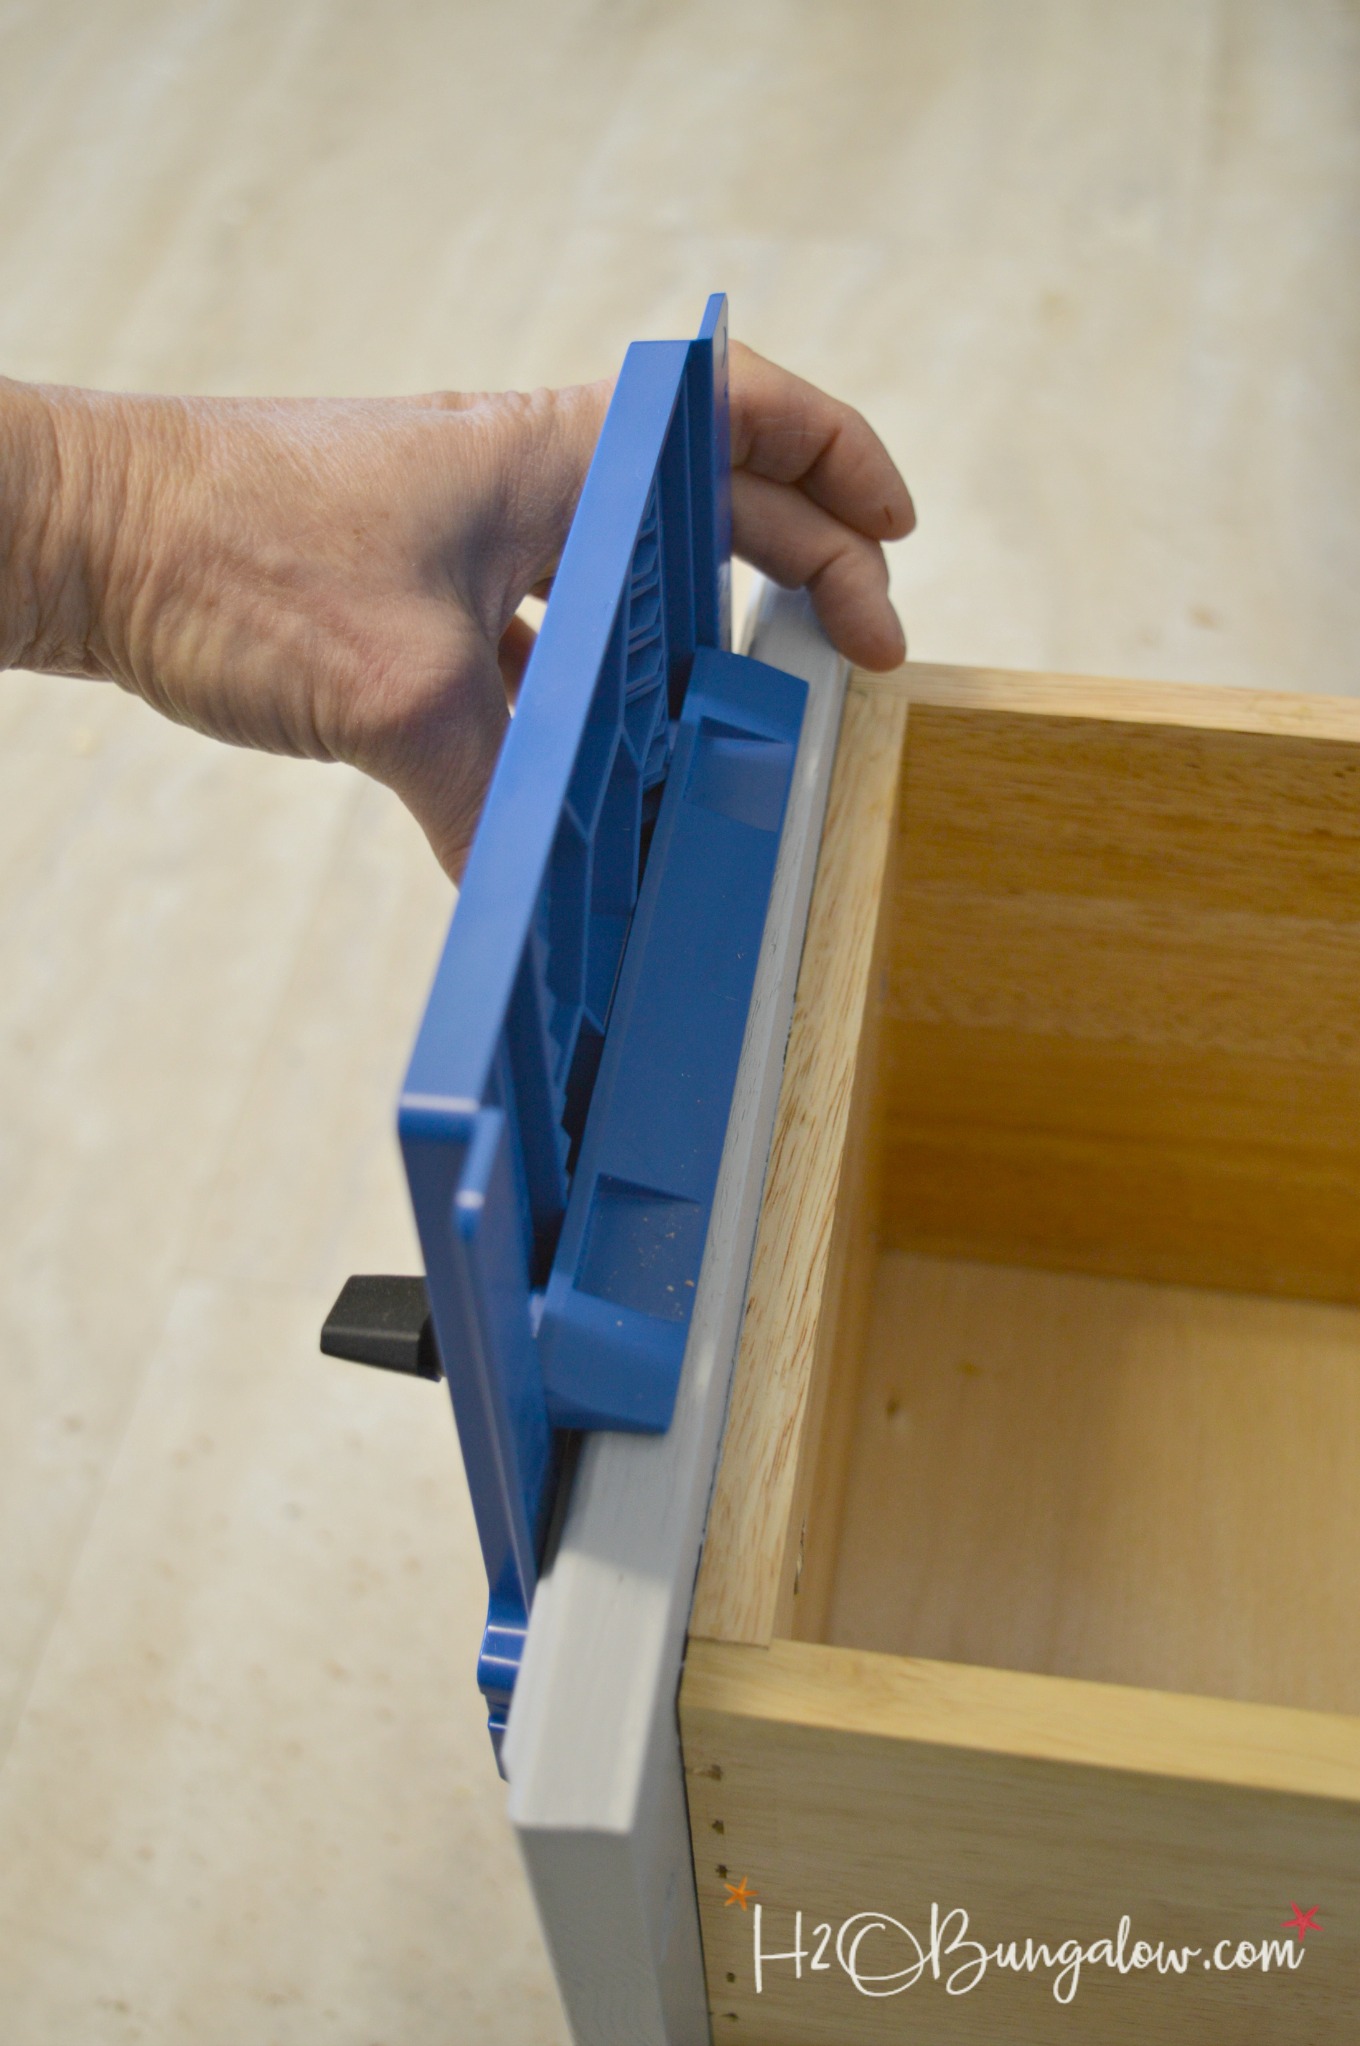 How to to install knobs and pulls on cabinets and furniture like a pro with a simple inexpensive tool that lines up everything perfectly for you. All you'll need is a drill. Find over 450 projects and ideas to make your home pretty on H2OBungalow.com 